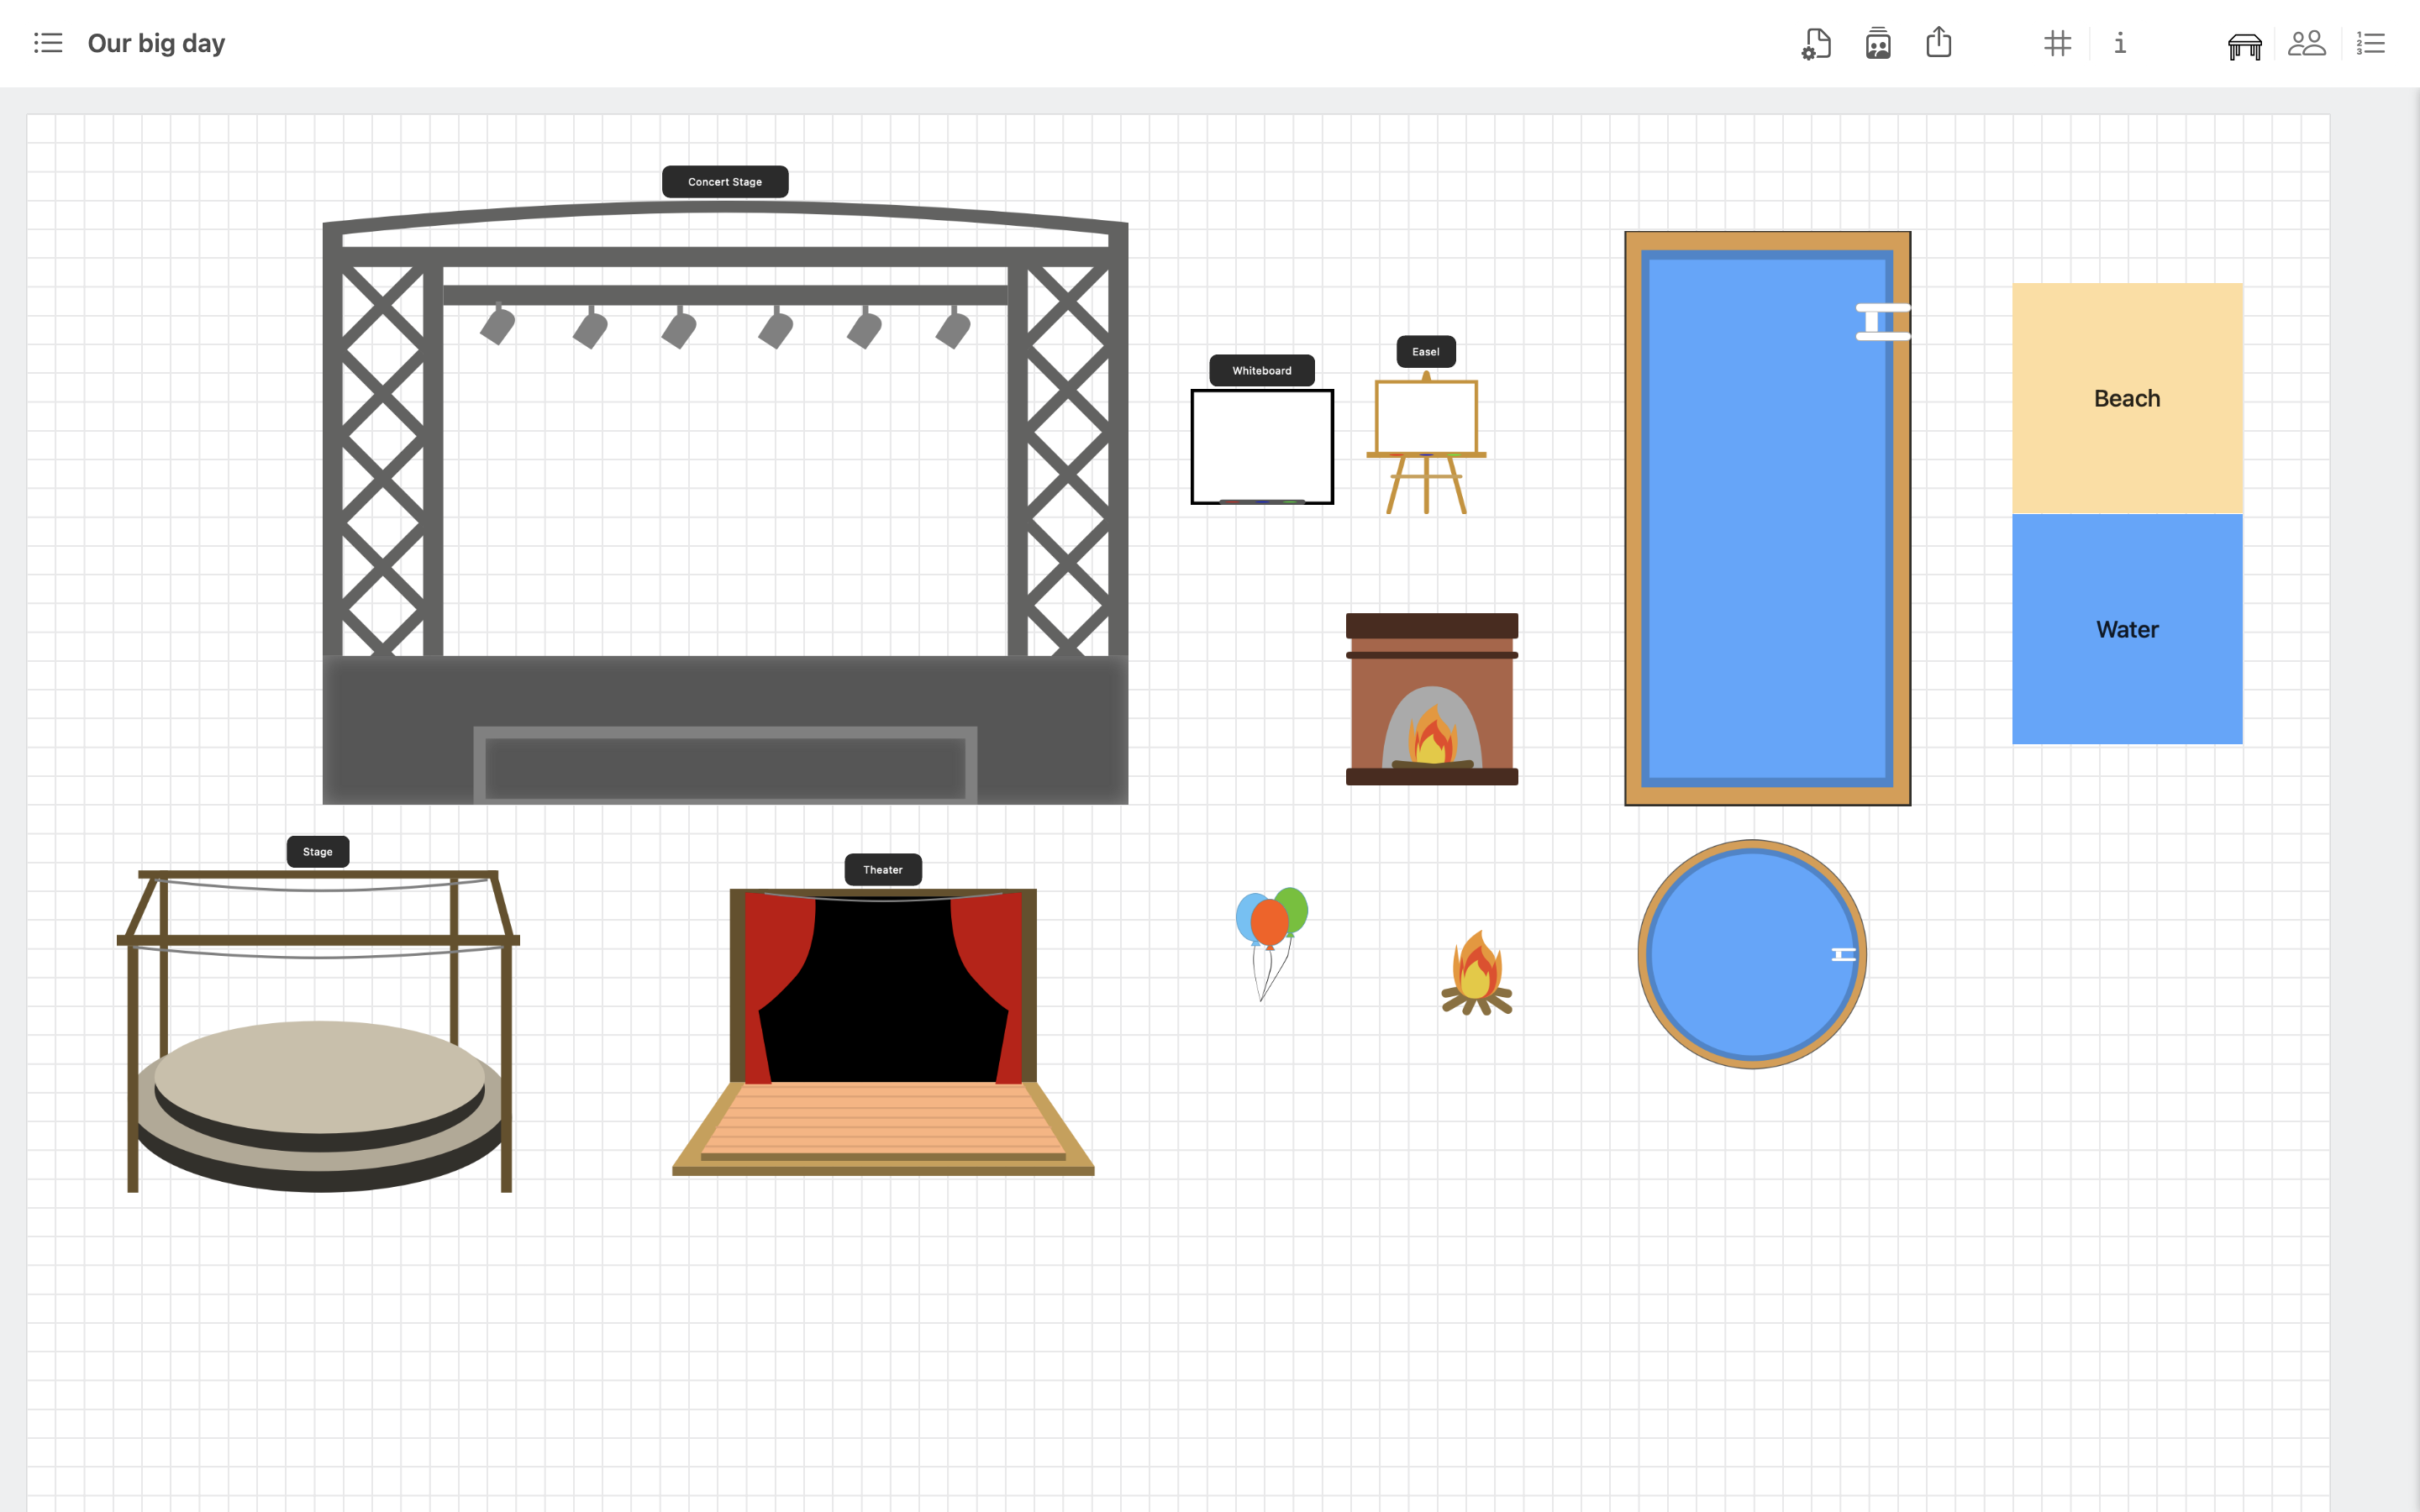 New library additions include stages, whiteboards, fire, pools, and more.